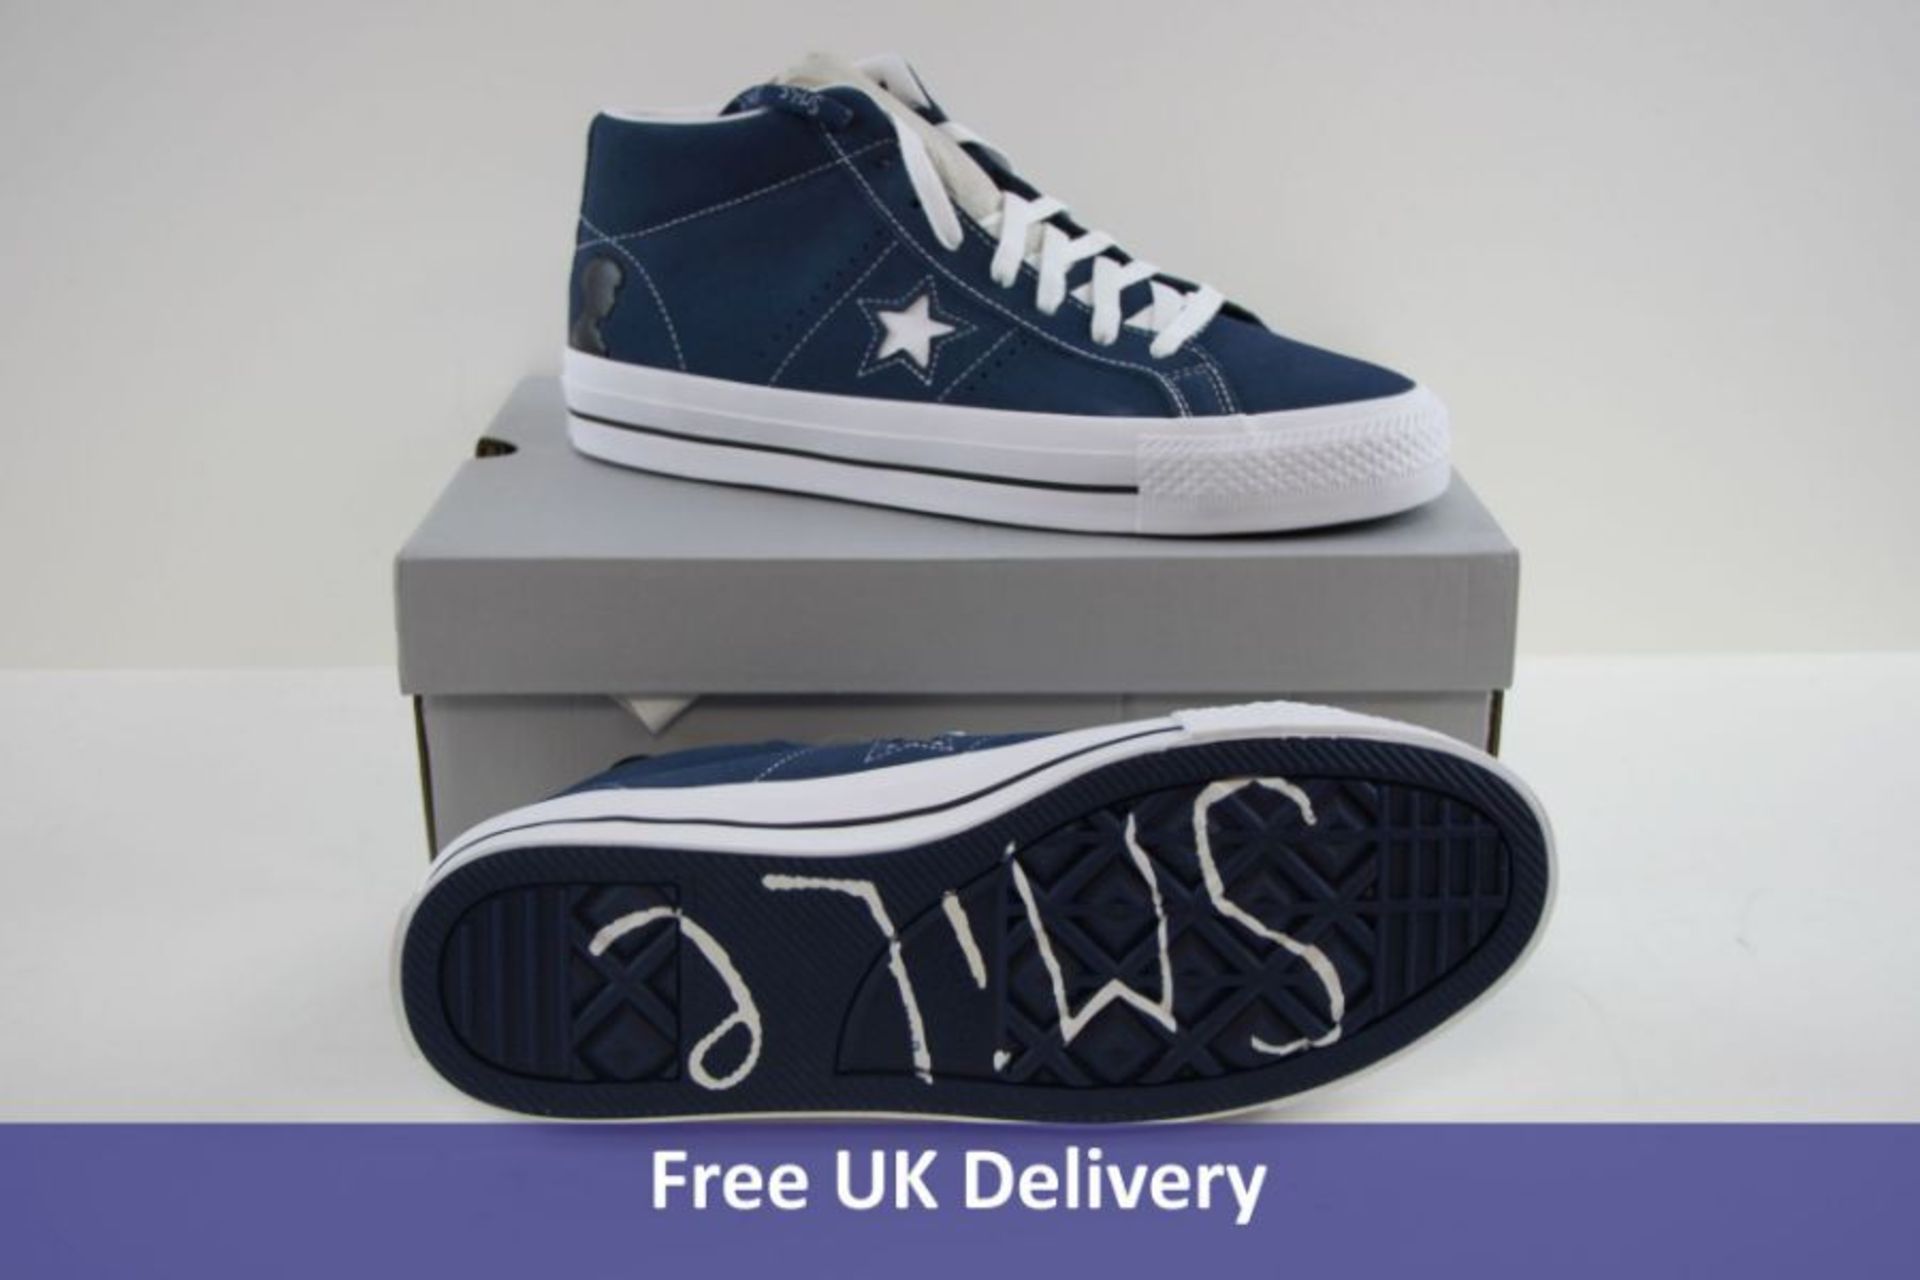 Converse Men's One Star Pro Mid Ben Raemers, Navy, White and Black, UK 9.5